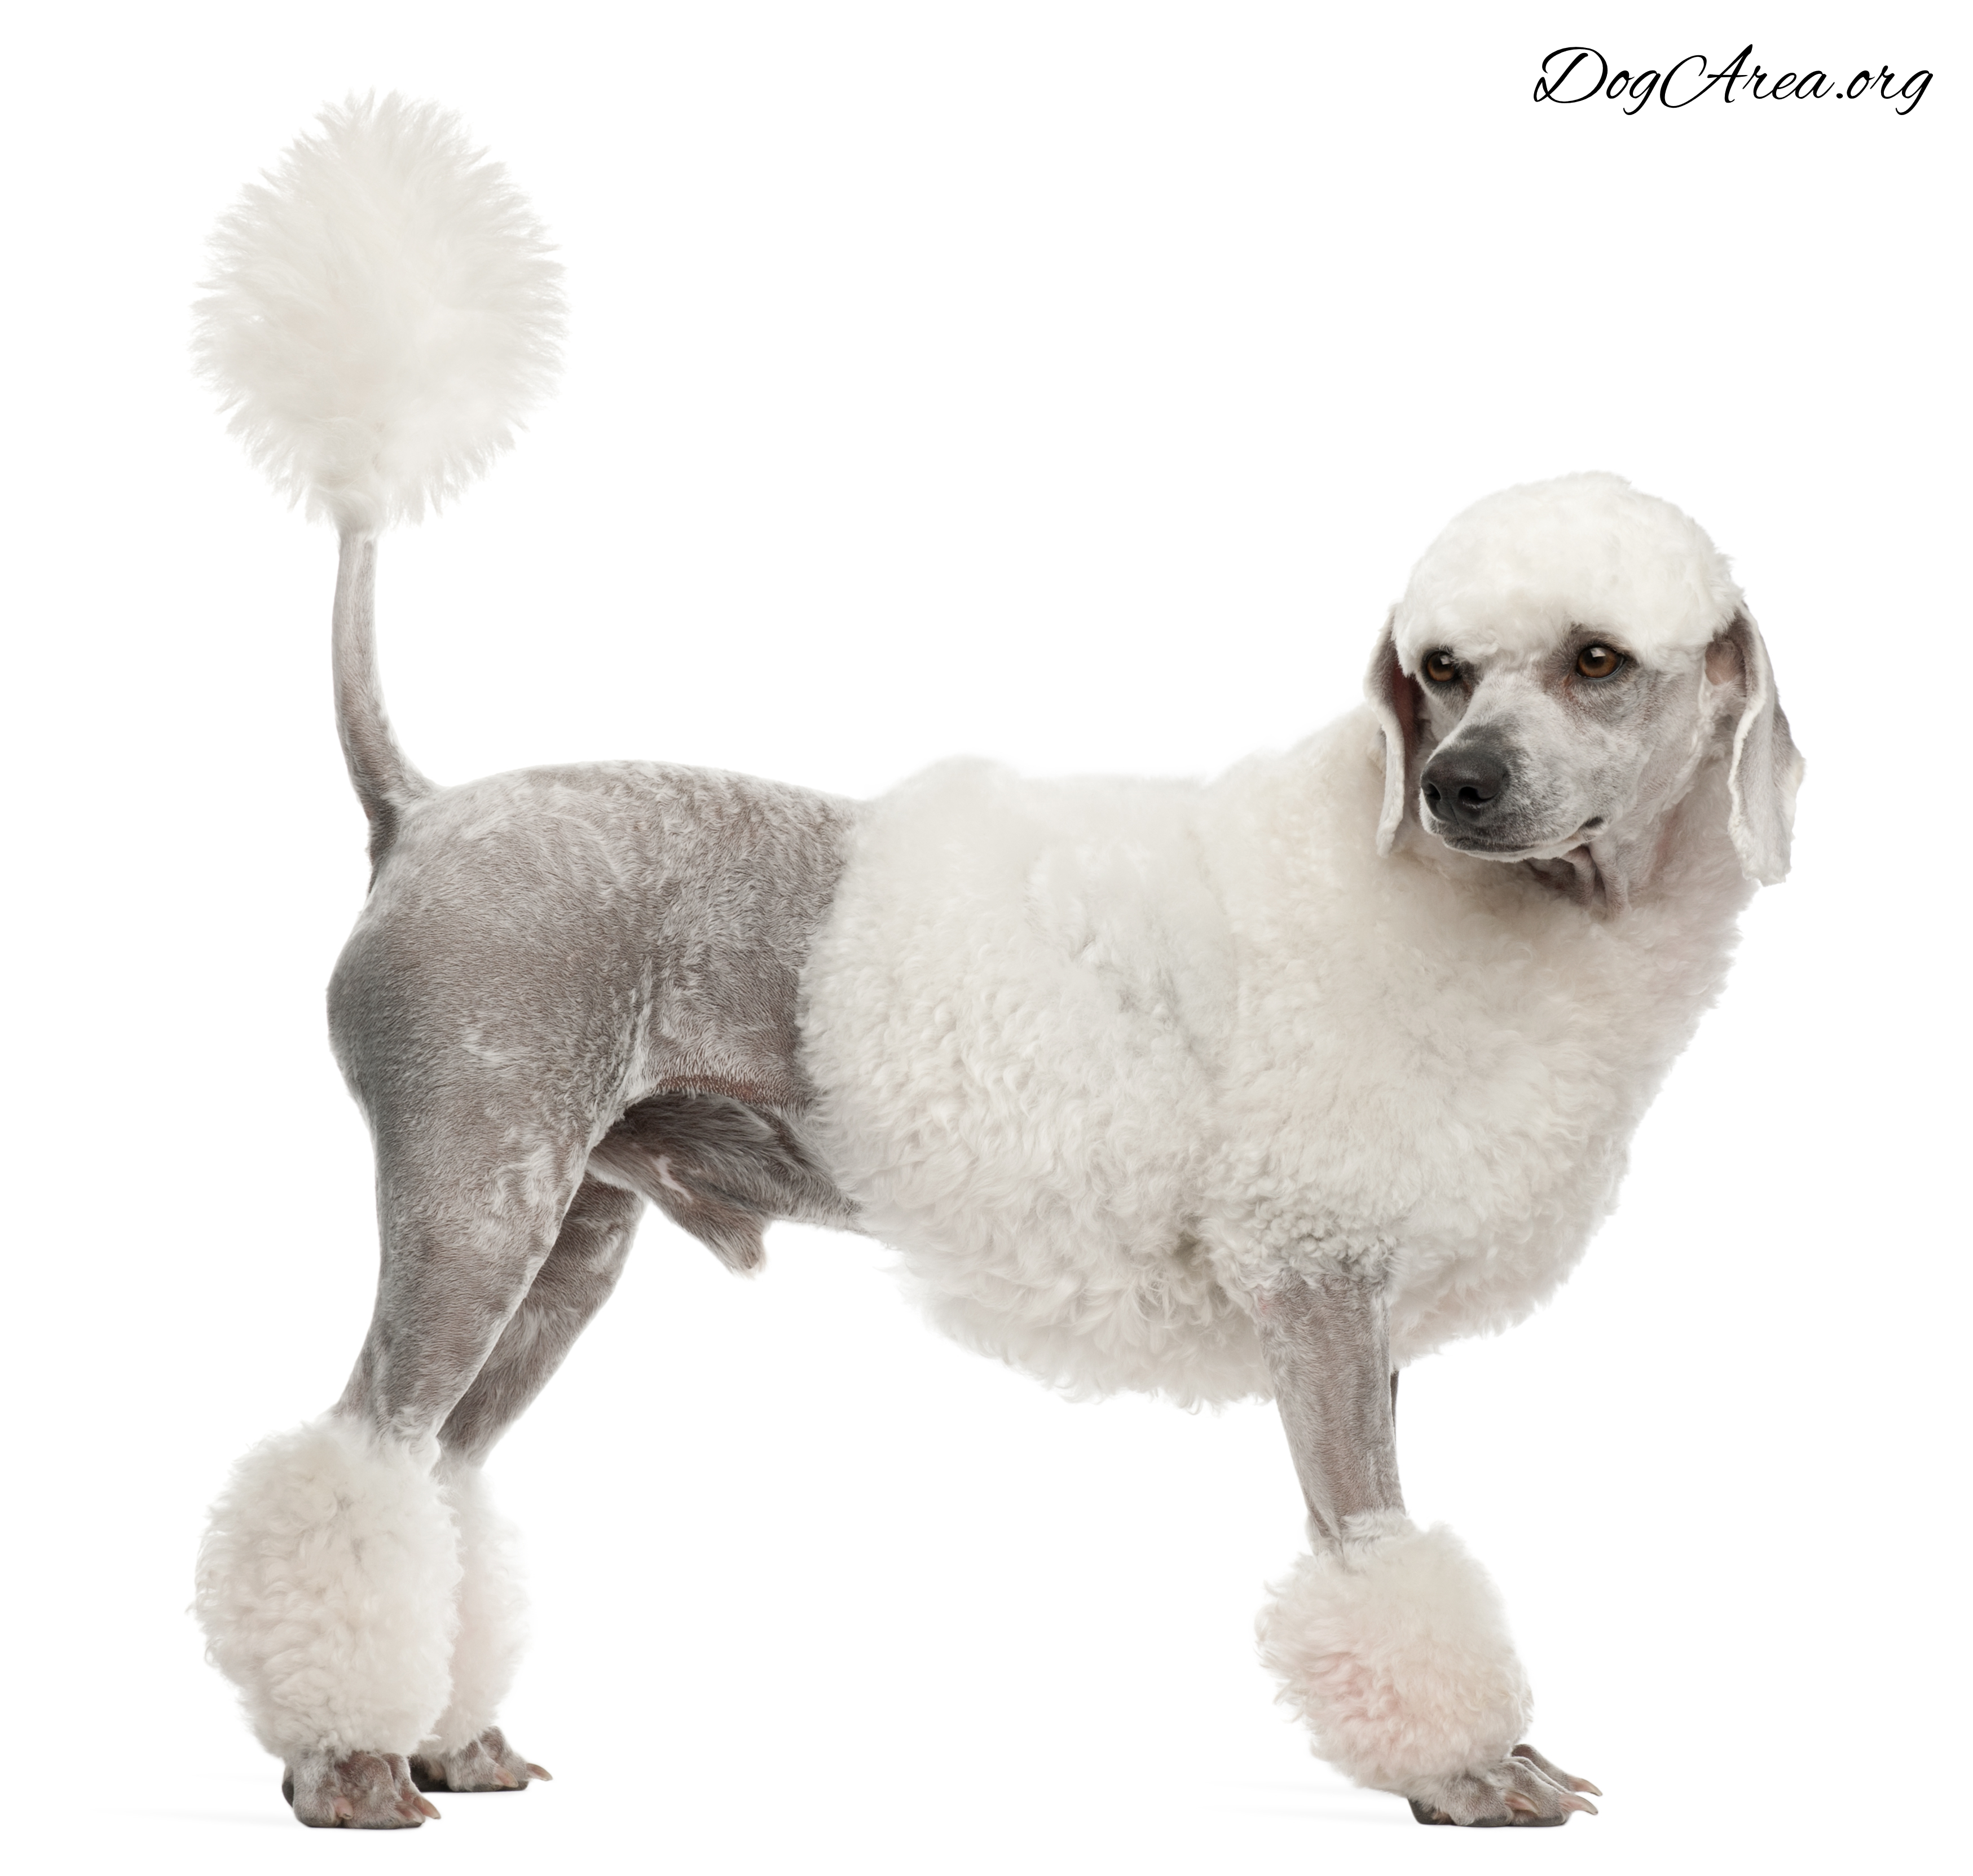 Poodle with Undocked Tail